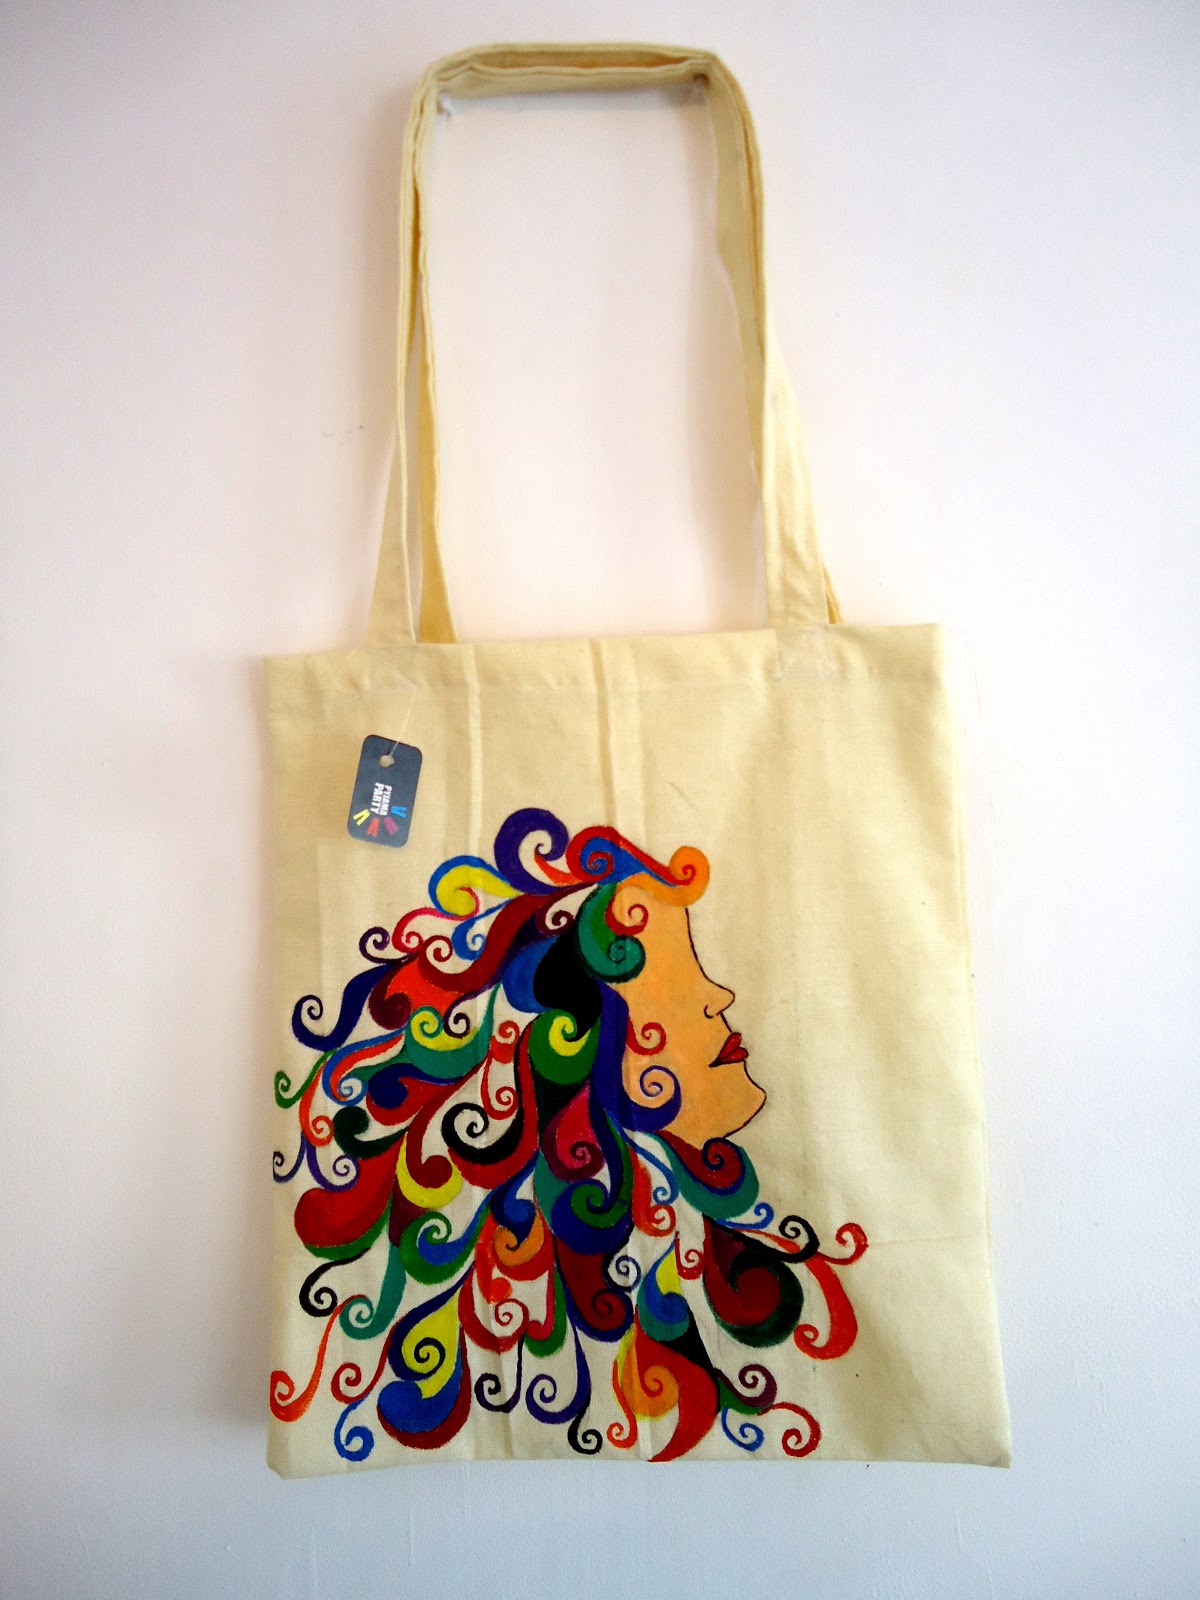 Pyjama Party Studio: Colour Therapy-hand-painted Tote bags